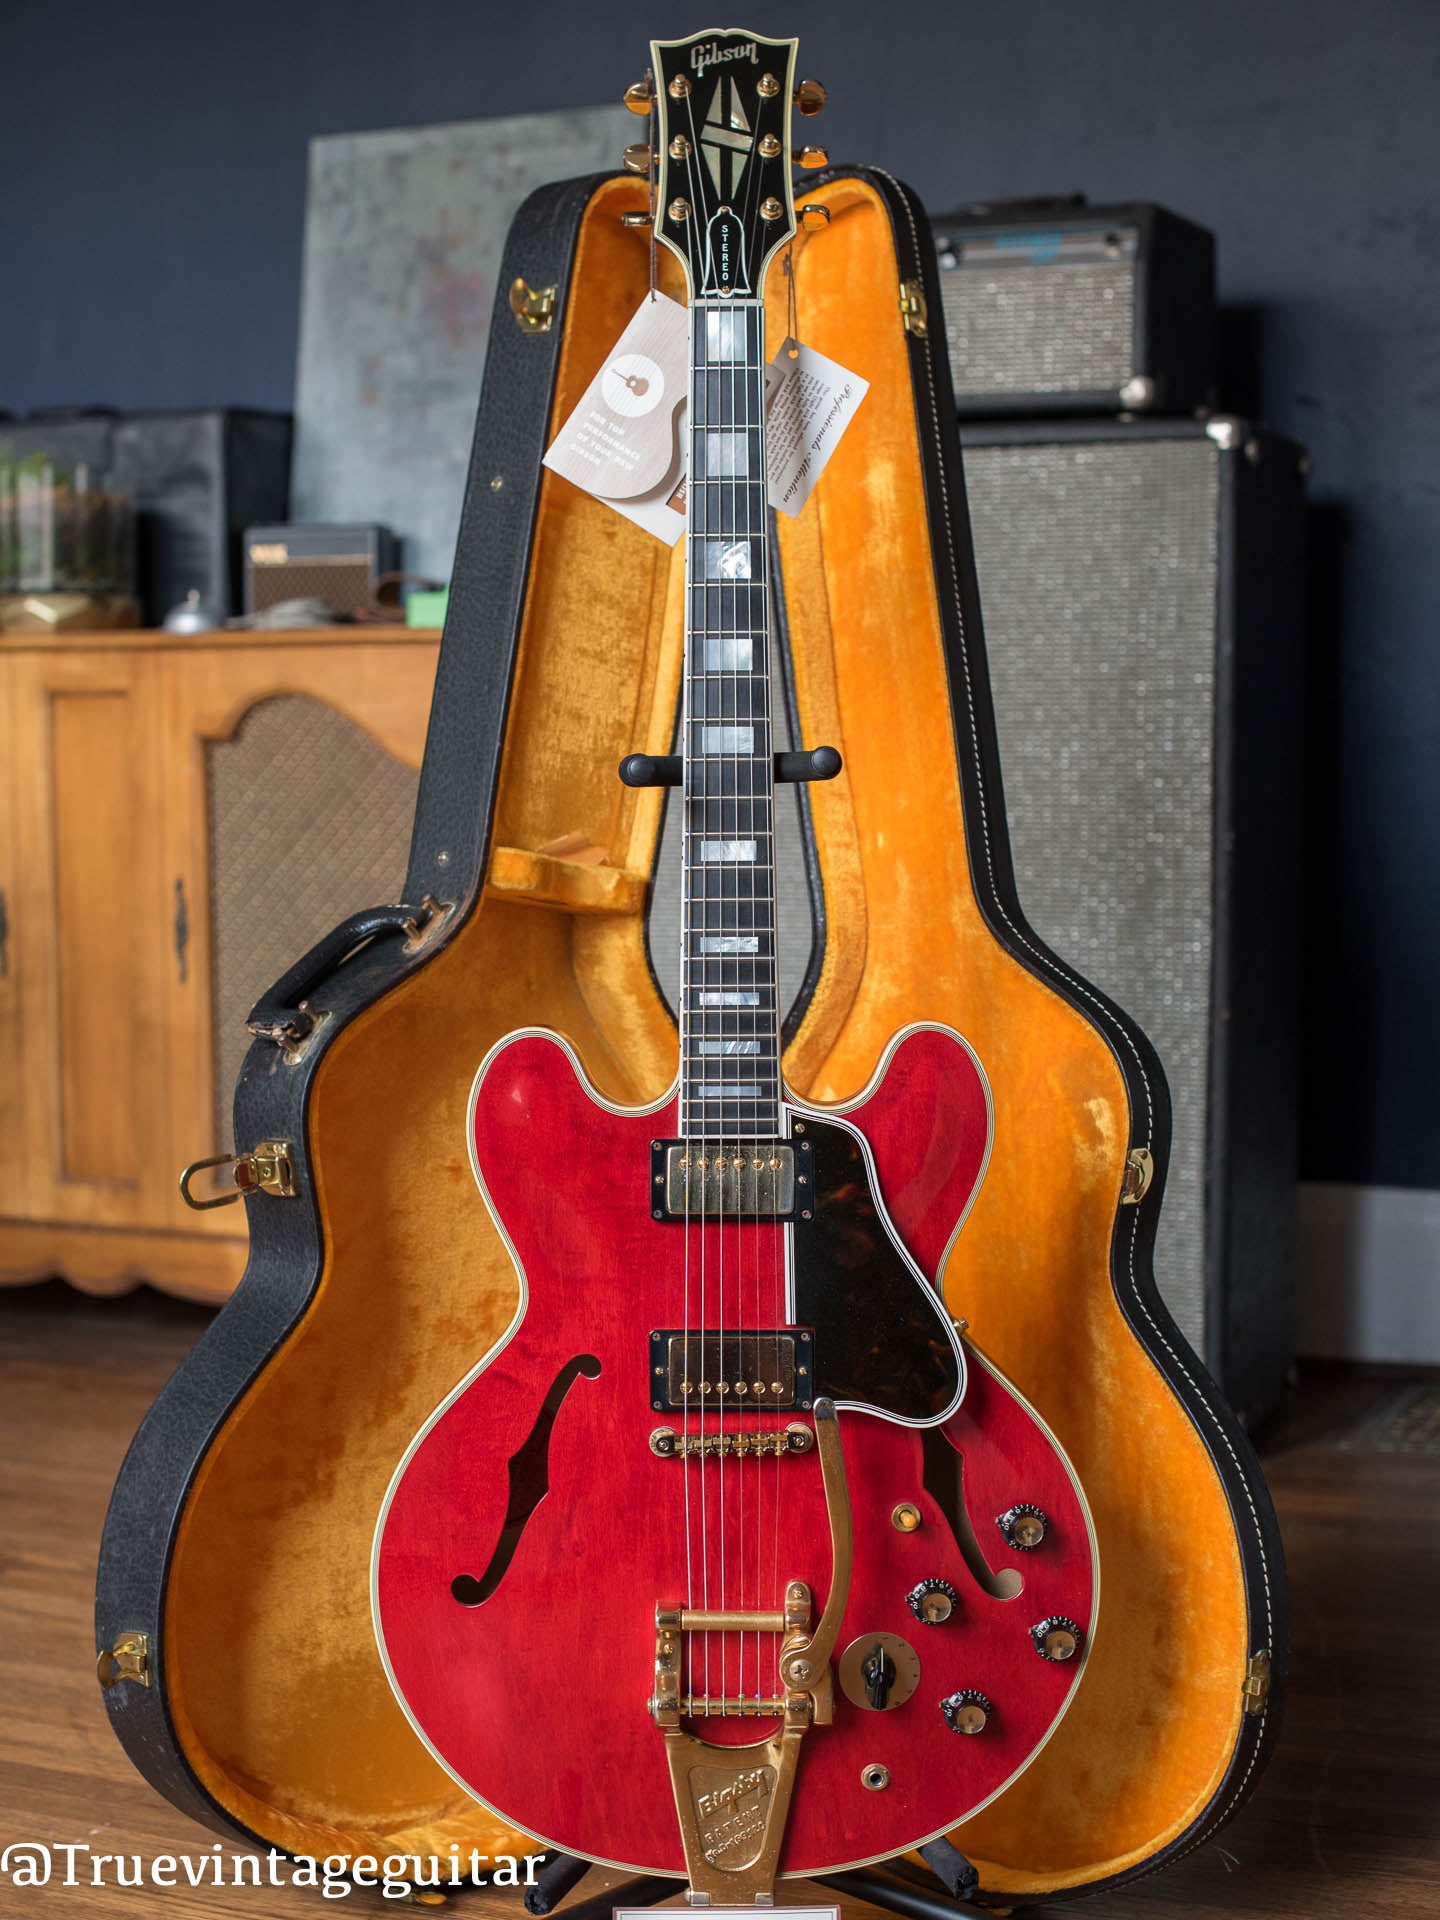 Vintage Gibson Red electric guitar